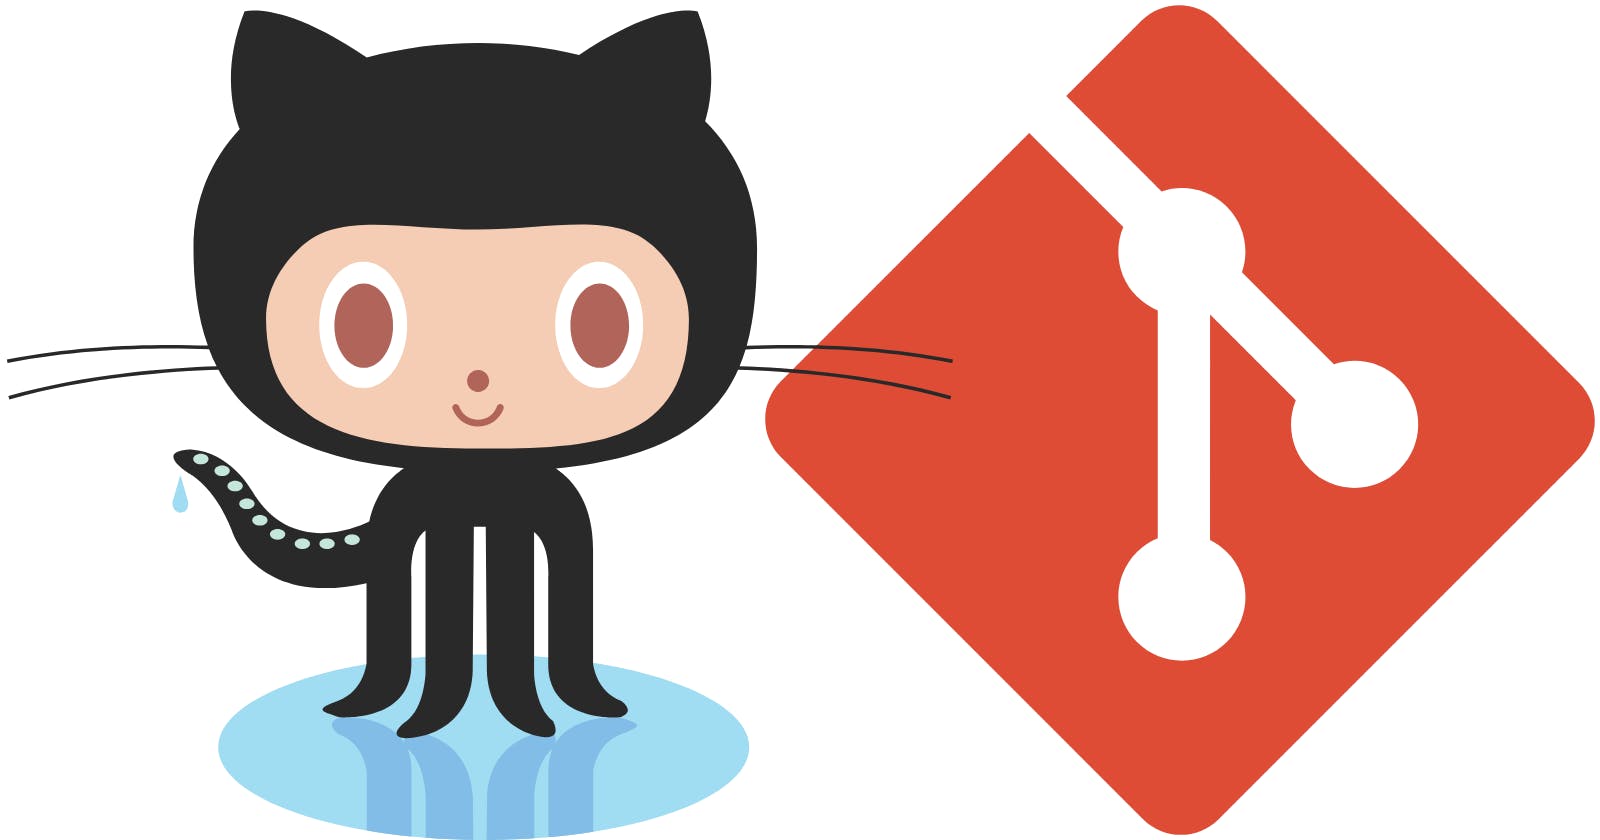 Mastering Git and Github: Key Concepts You Need to Know for Successful Version Control